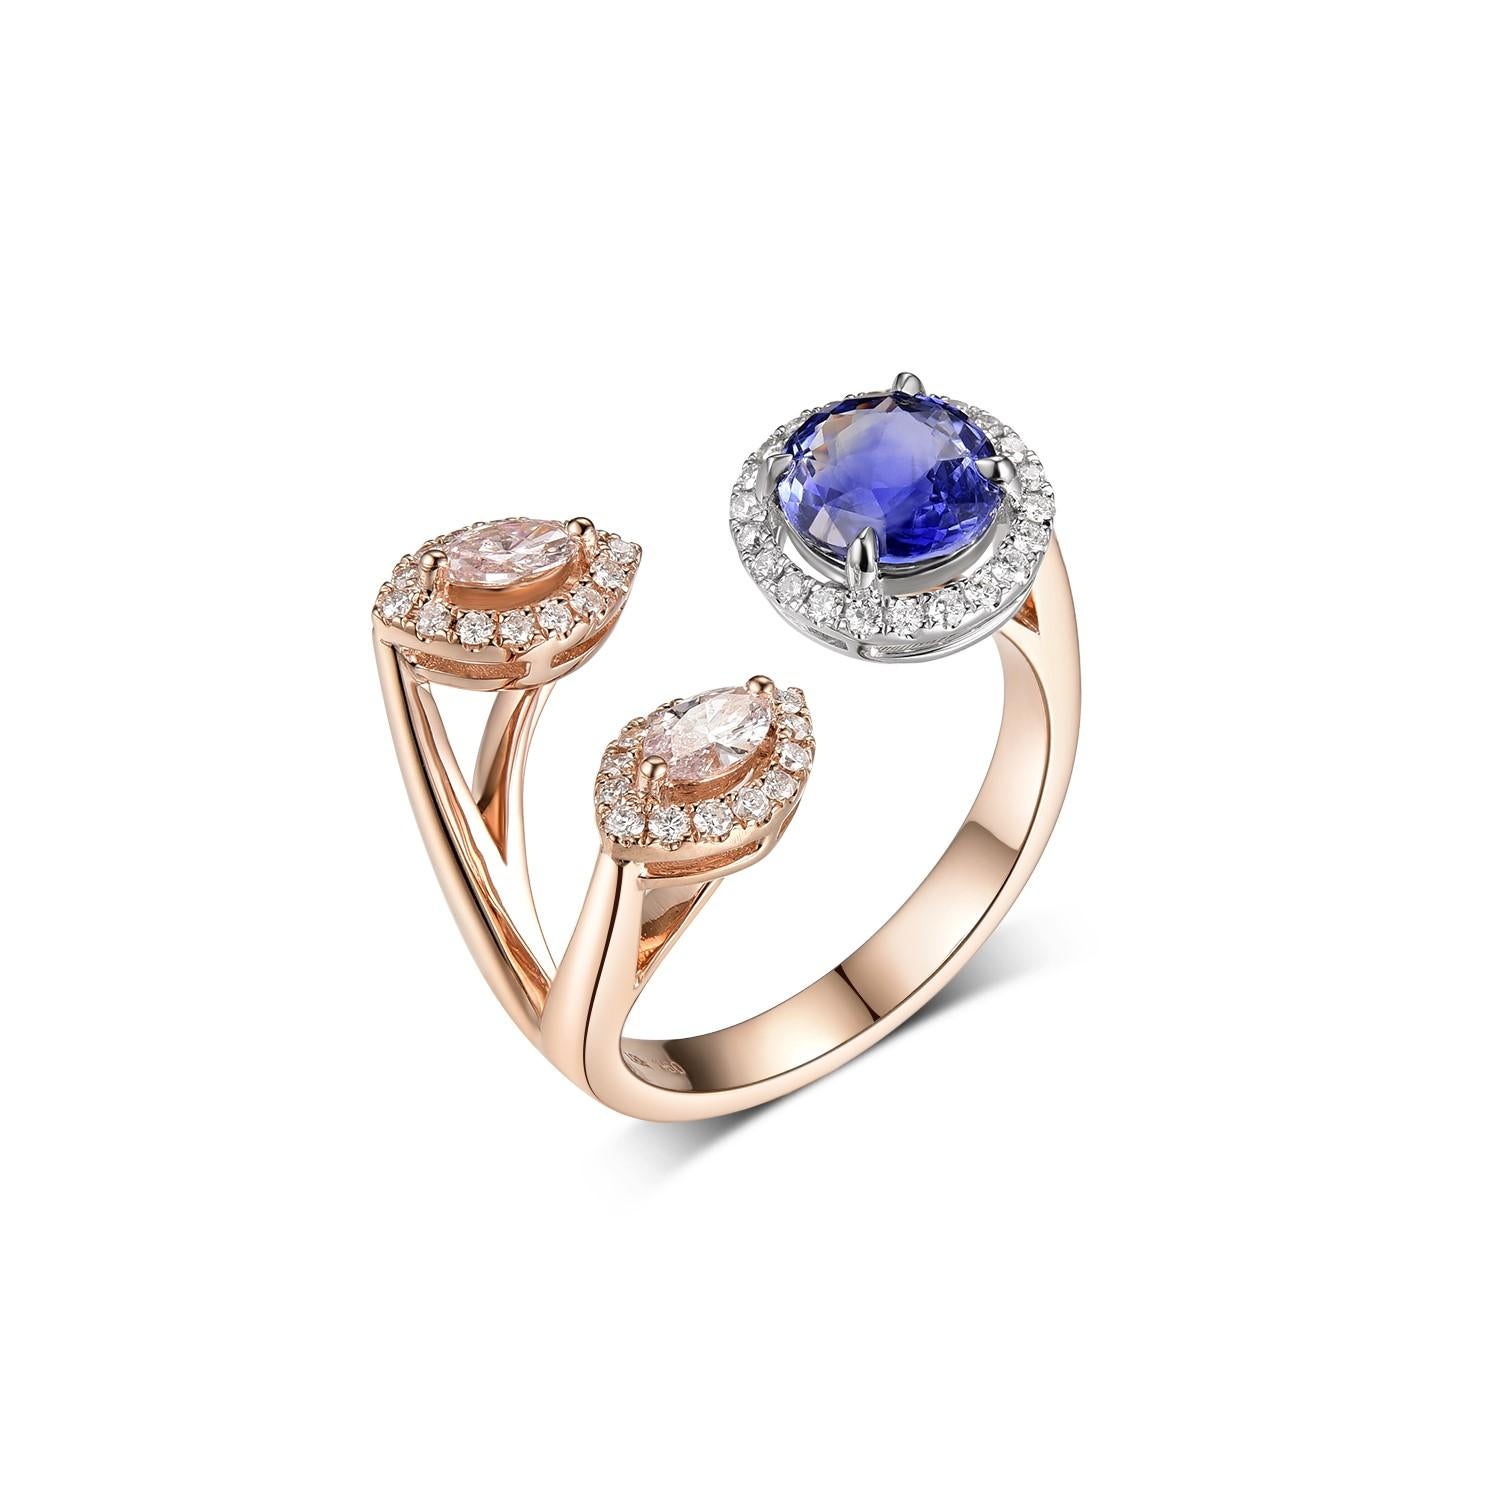 This ring features 2 marquise pink diamonds weight 0.24 carat each, 1.37 carat of blue sapphire and 0.26 carat of round diamond set in a bypass design. Diamonds are set in 18 karat white gold and the body of the ring is made with 18 karat rose gold.